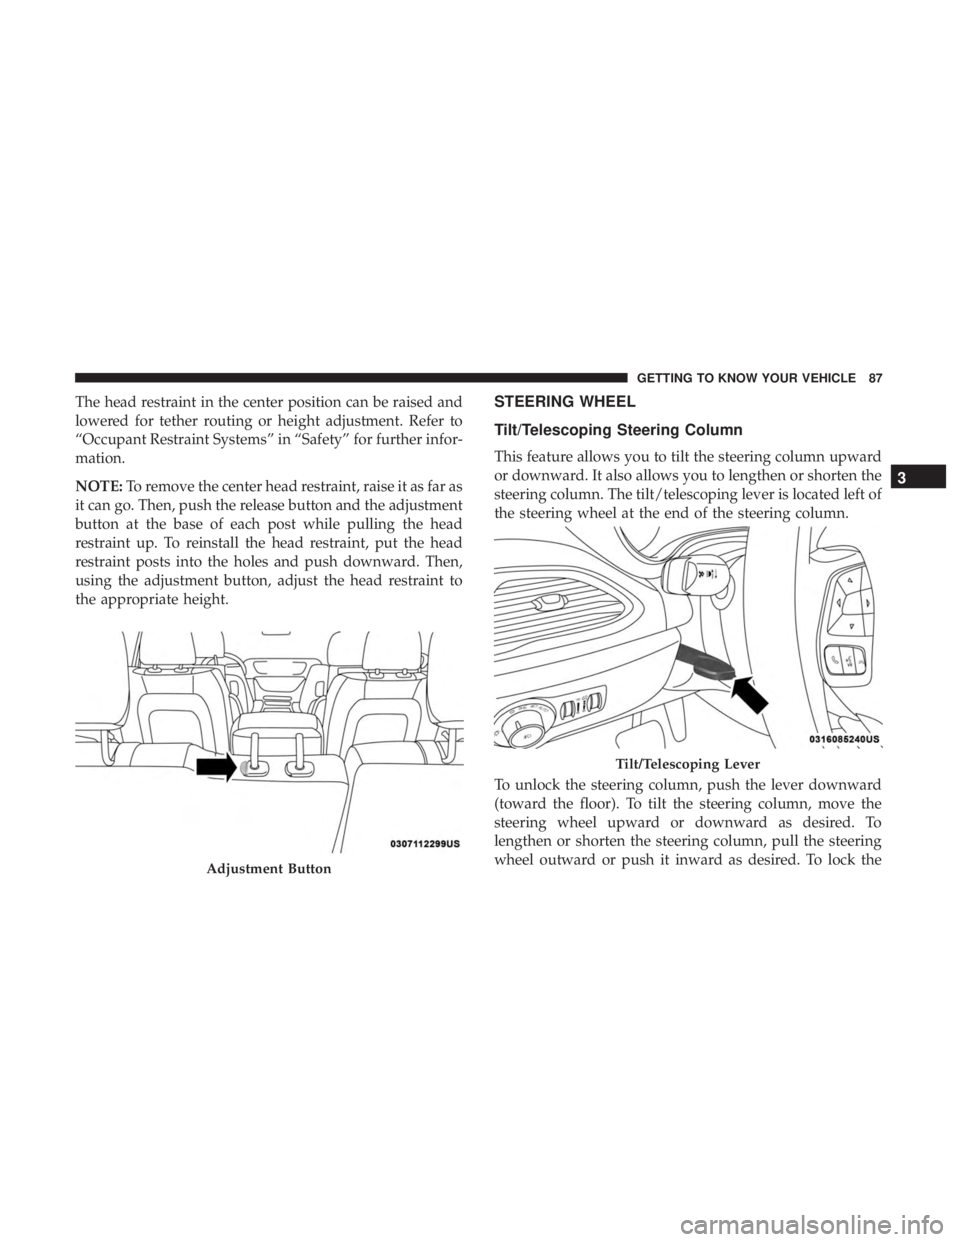 CHRYSLER PACIFICA HYBRID 2018  Owners Manual The head restraint in the center position can be raised and
lowered for tether routing or height adjustment. Refer to
“Occupant Restraint Systems” in “Safety” for further infor-
mation.
NOTE:T